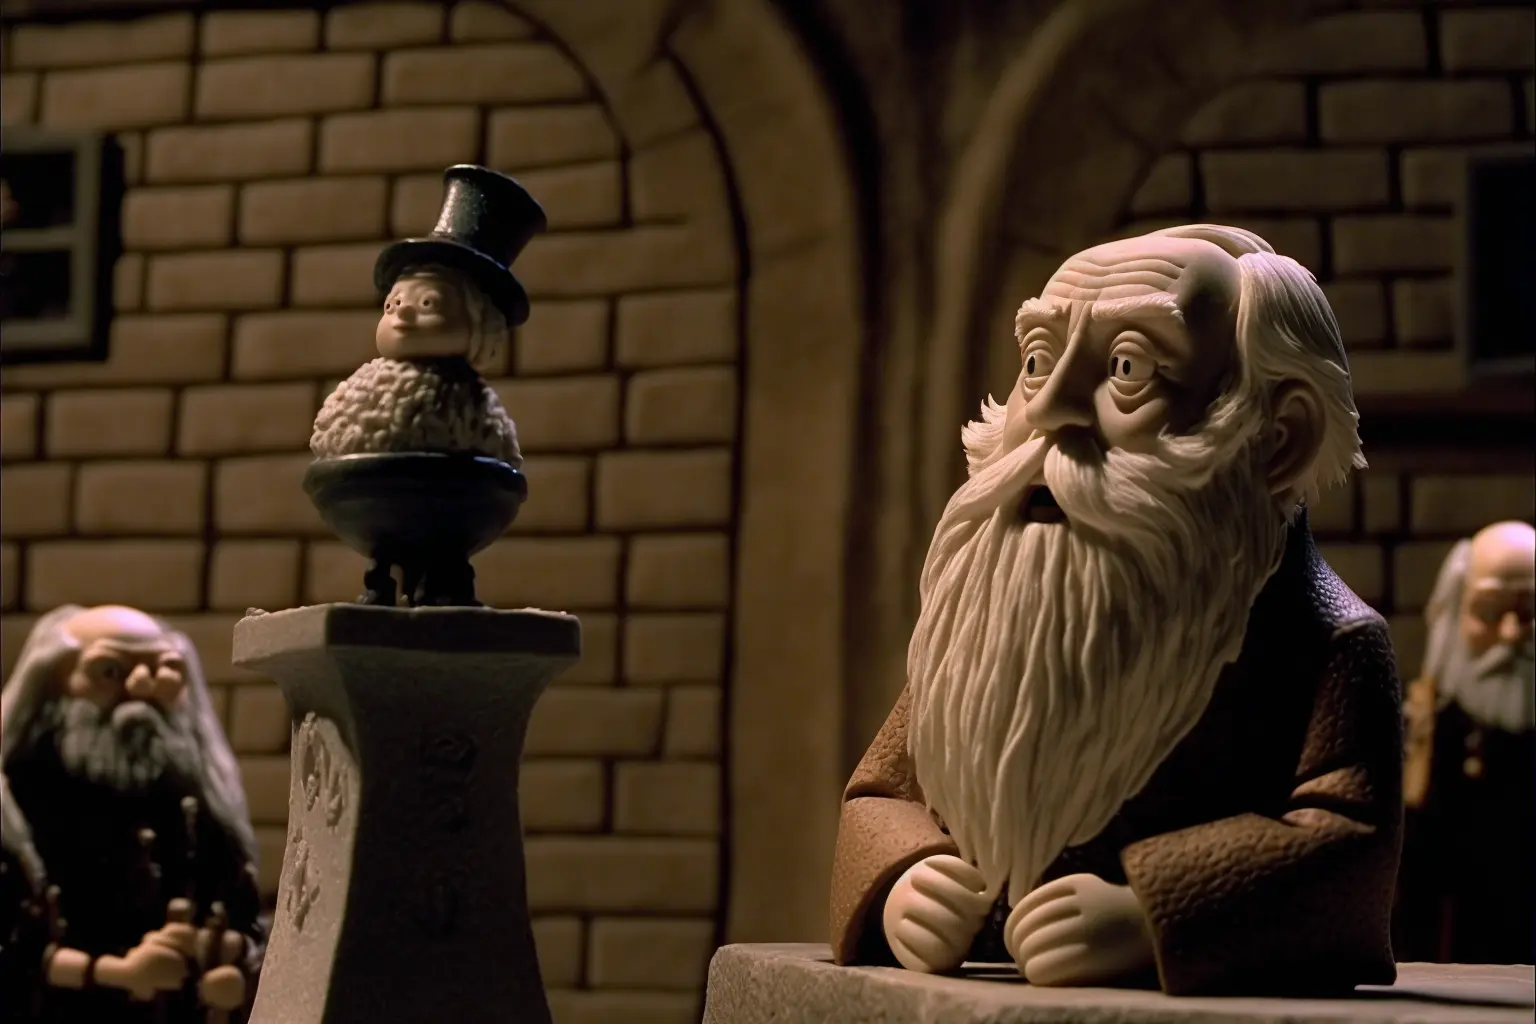 DVD screengrab from stop motion movie, claymation, dumbledore giving a speech in the great hall, directed by Tim Burton